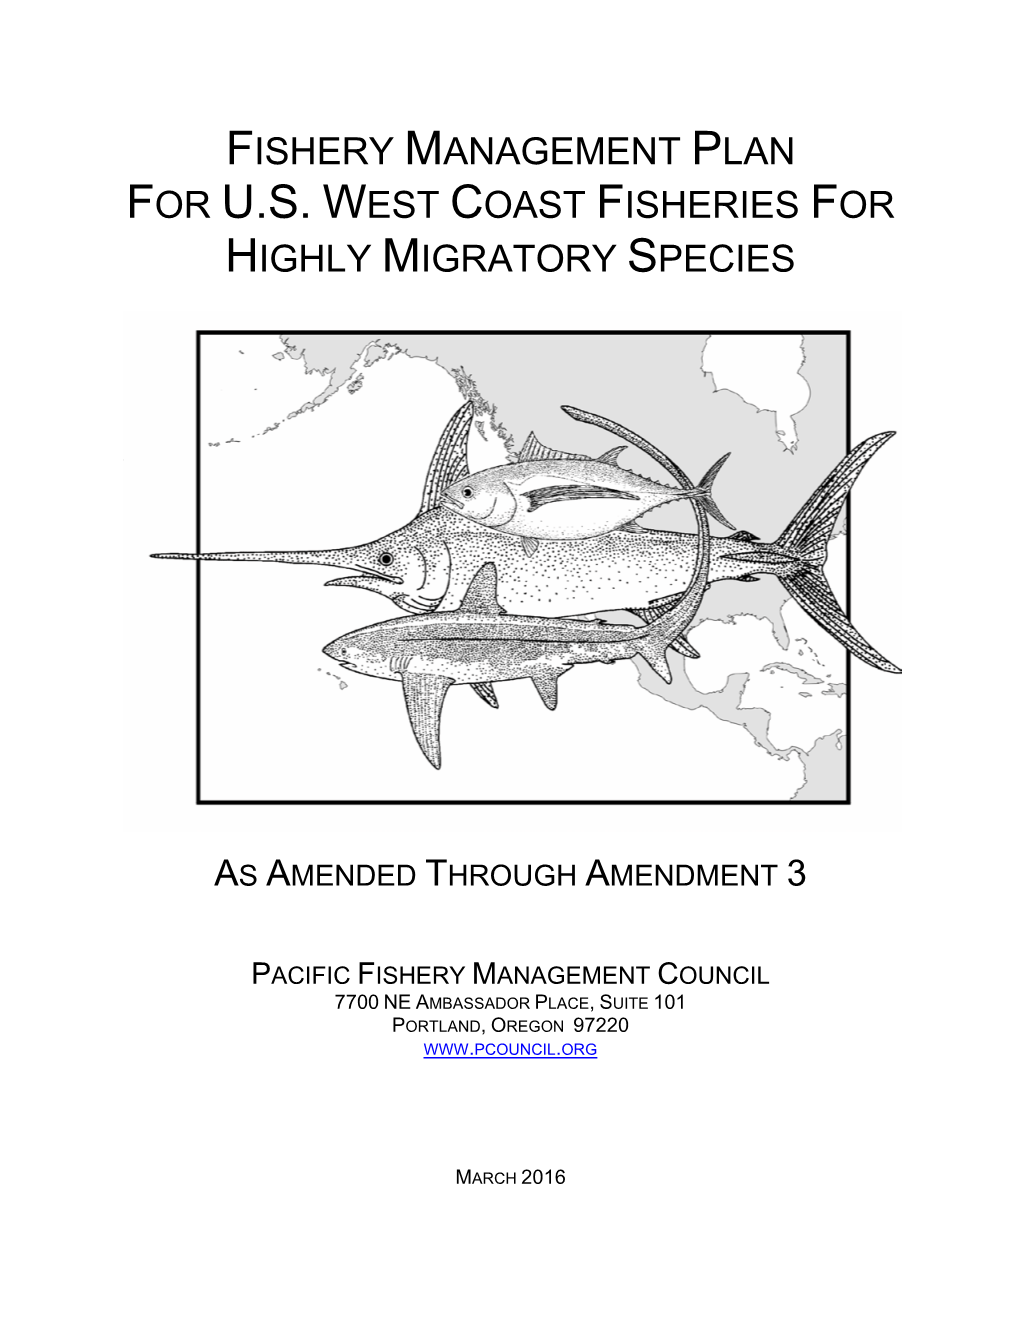 Fishery Management Plan for U.S